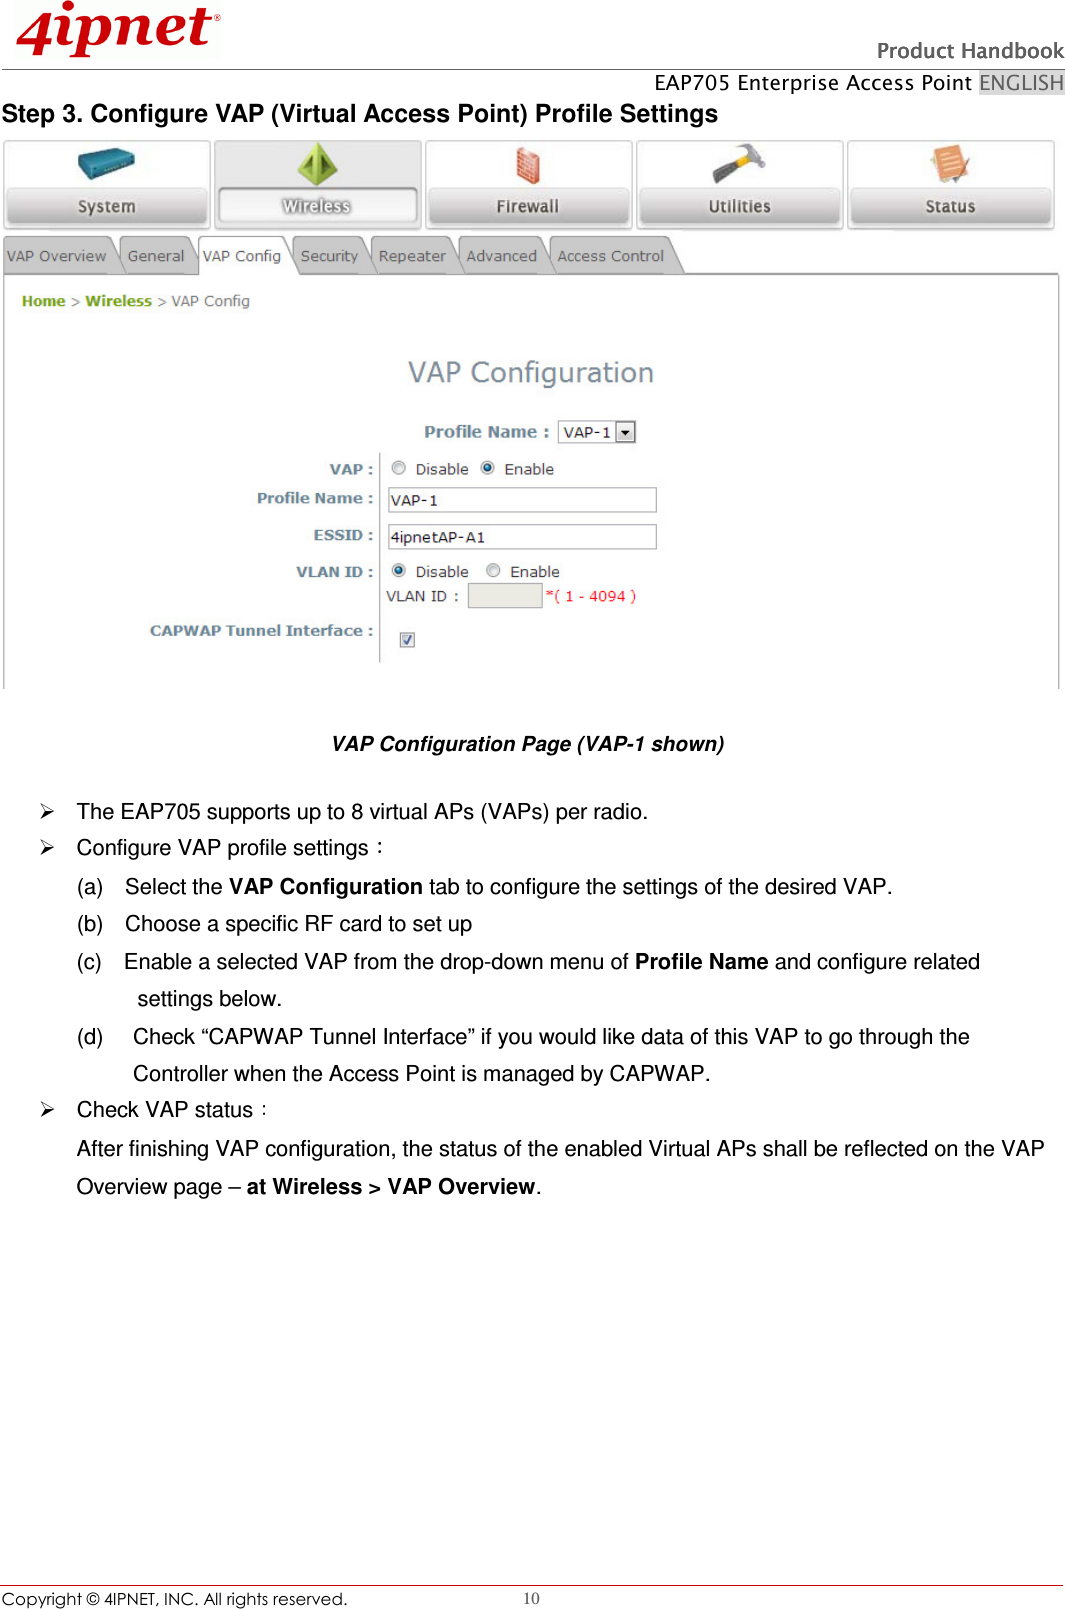   Product HandbookProduct HandbookProduct HandbookProduct Handbook    EAP705 Enterprise Access Point ENGLISH Copyright © 4IPNET, INC. All rights reserved.                                                              10 Step 3. Configure VAP (Virtual Access Point) Profile Settings  VAP Configuration Page (VAP-1 shown)   The EAP705 supports up to 8 virtual APs (VAPs) per radio.       Configure VAP profile settings  (a)    Select the VAP Configuration tab to configure the settings of the desired VAP.   (b)    Choose a specific RF card to set up   (c)    Enable a selected VAP from the drop-down menu of Profile Name and configure related         settings below. (d)    Check “CAPWAP Tunnel Interface” if you would like data of this VAP to go through the Controller when the Access Point is managed by CAPWAP.     Check VAP status  After finishing VAP configuration, the status of the enabled Virtual APs shall be reflected on the VAP Overview page – at Wireless &gt; VAP Overview.   